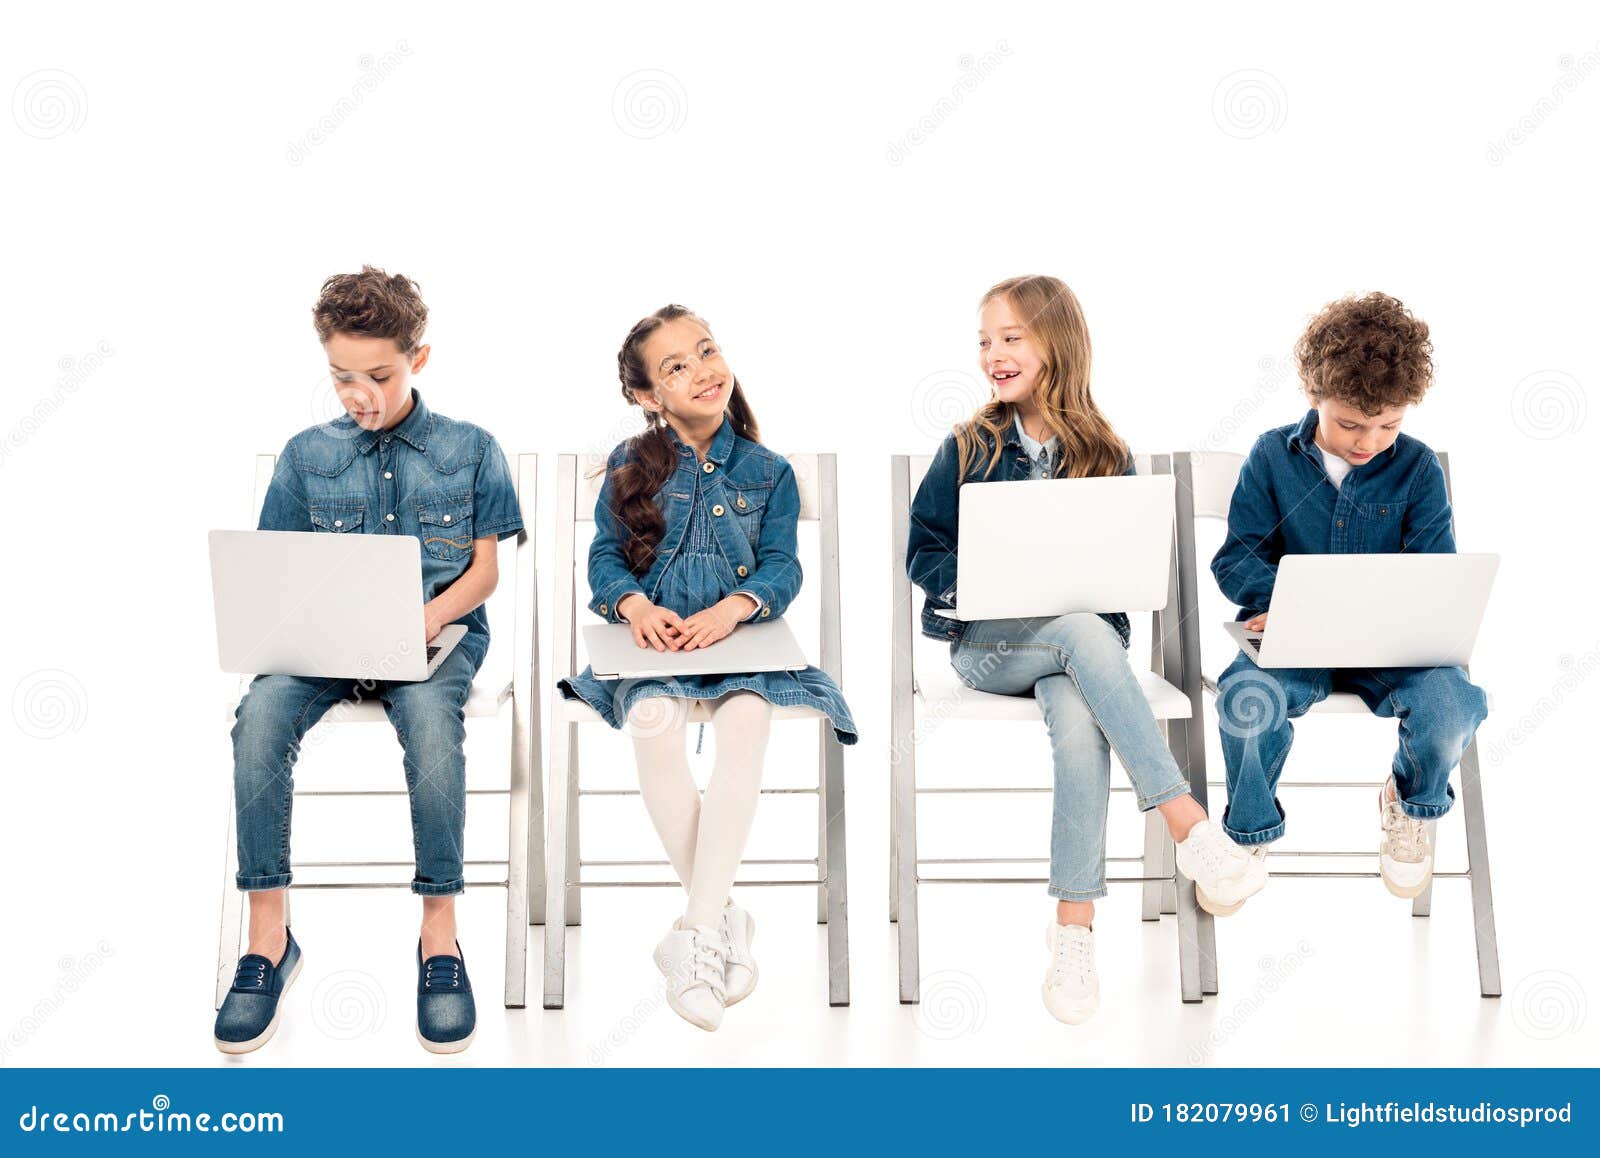 four kids in denim clothes sitting on chairs and using laptops on white.